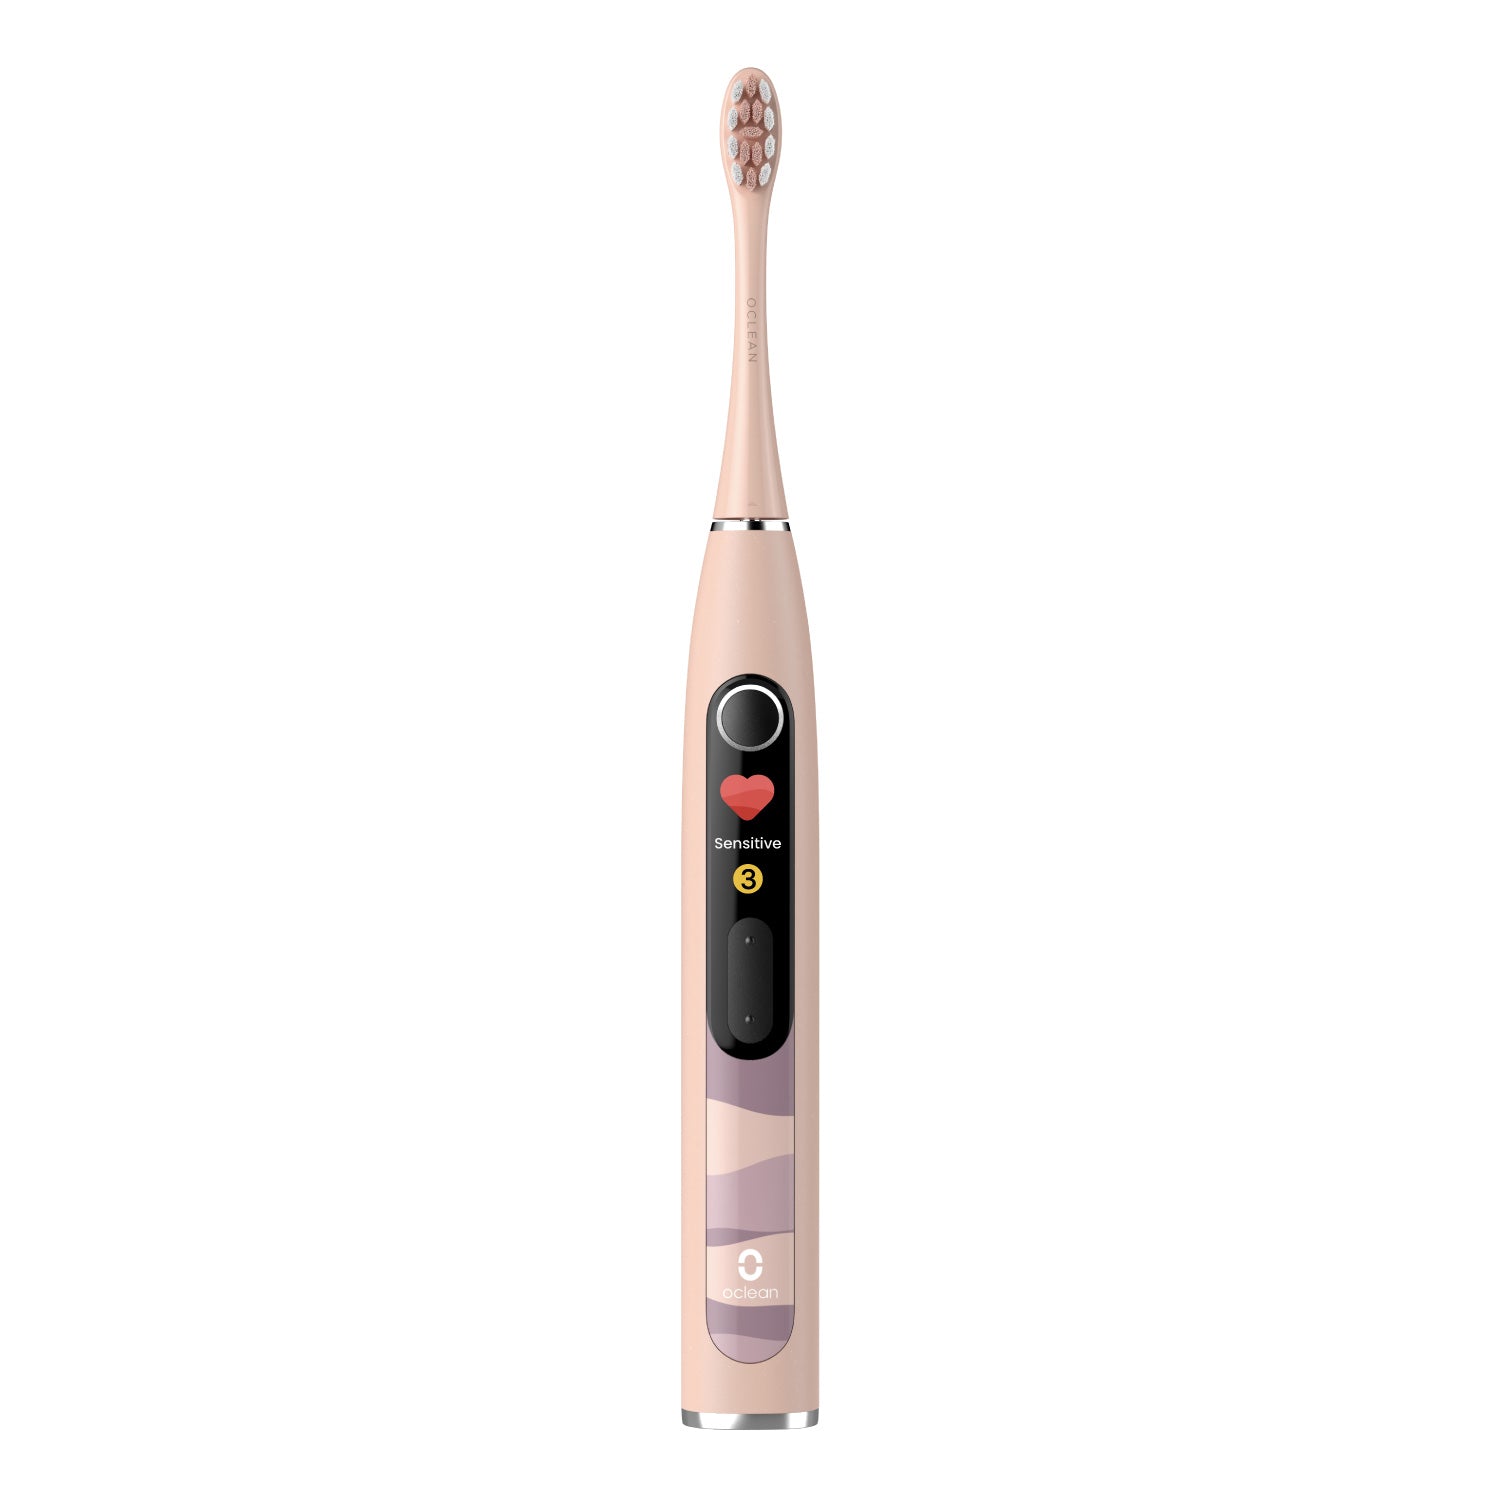 Oclean X10 Smart Sonic Electric Toothbrush Toothbrushes Pink  Oclean Official